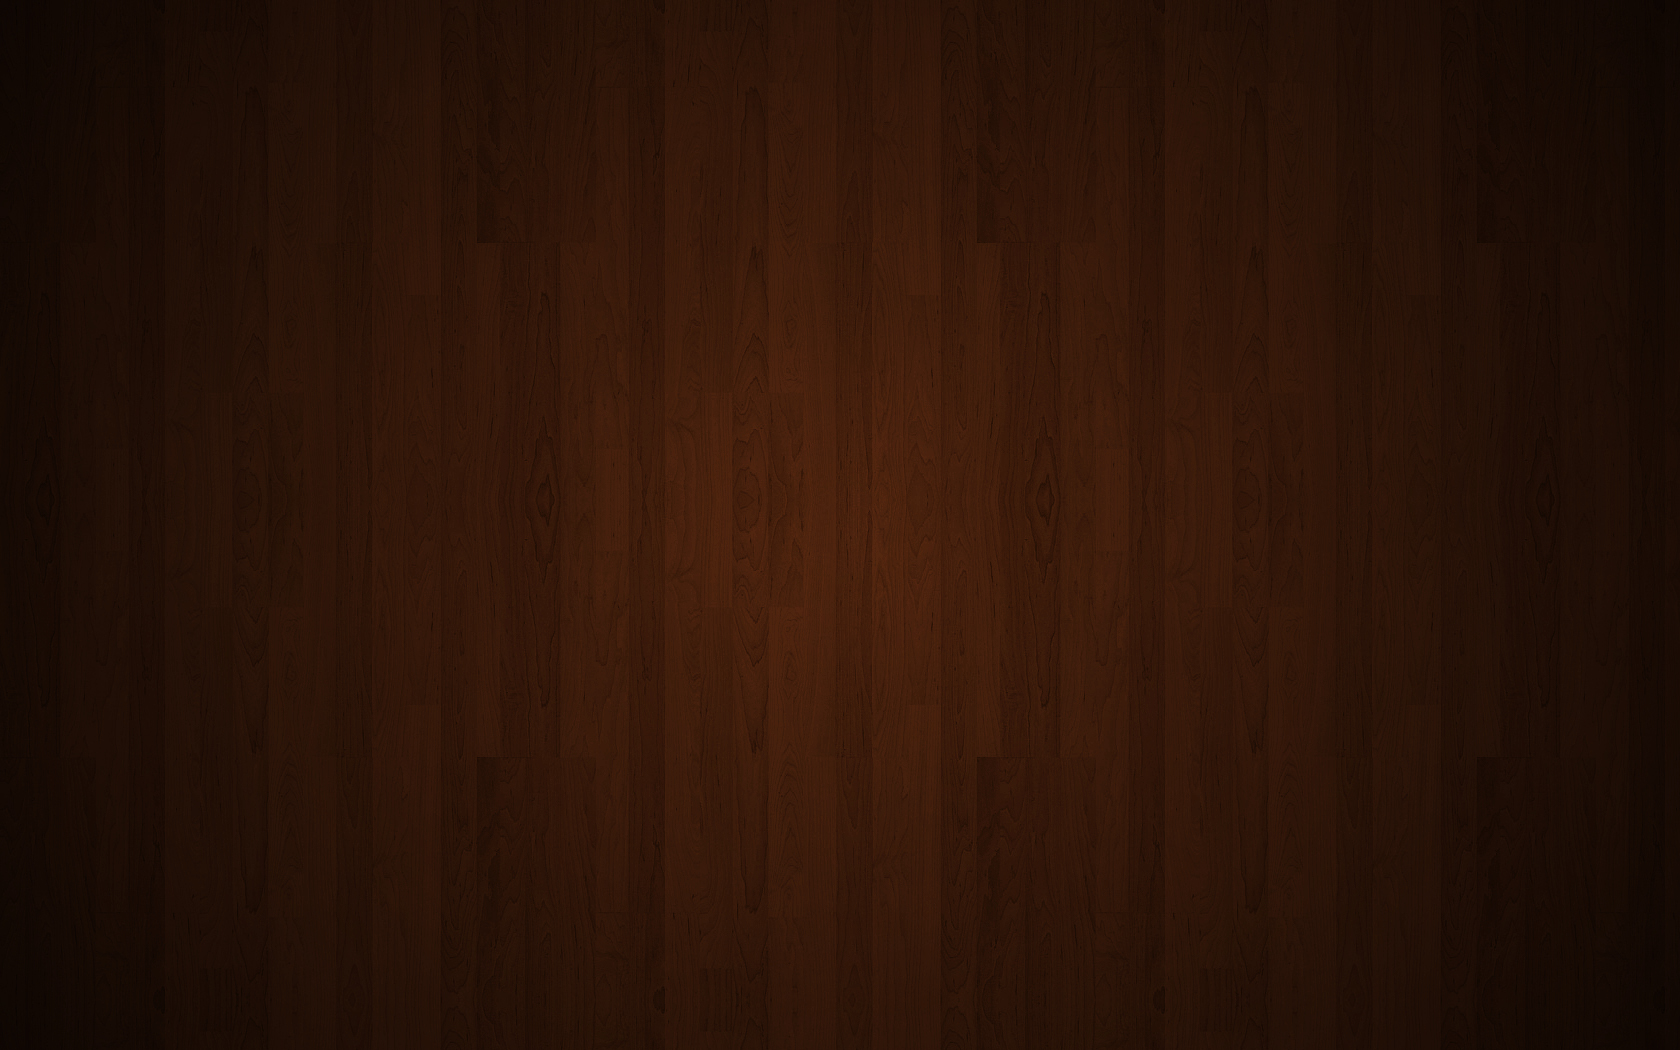 Re: Apple wooden wallpaper without the logo